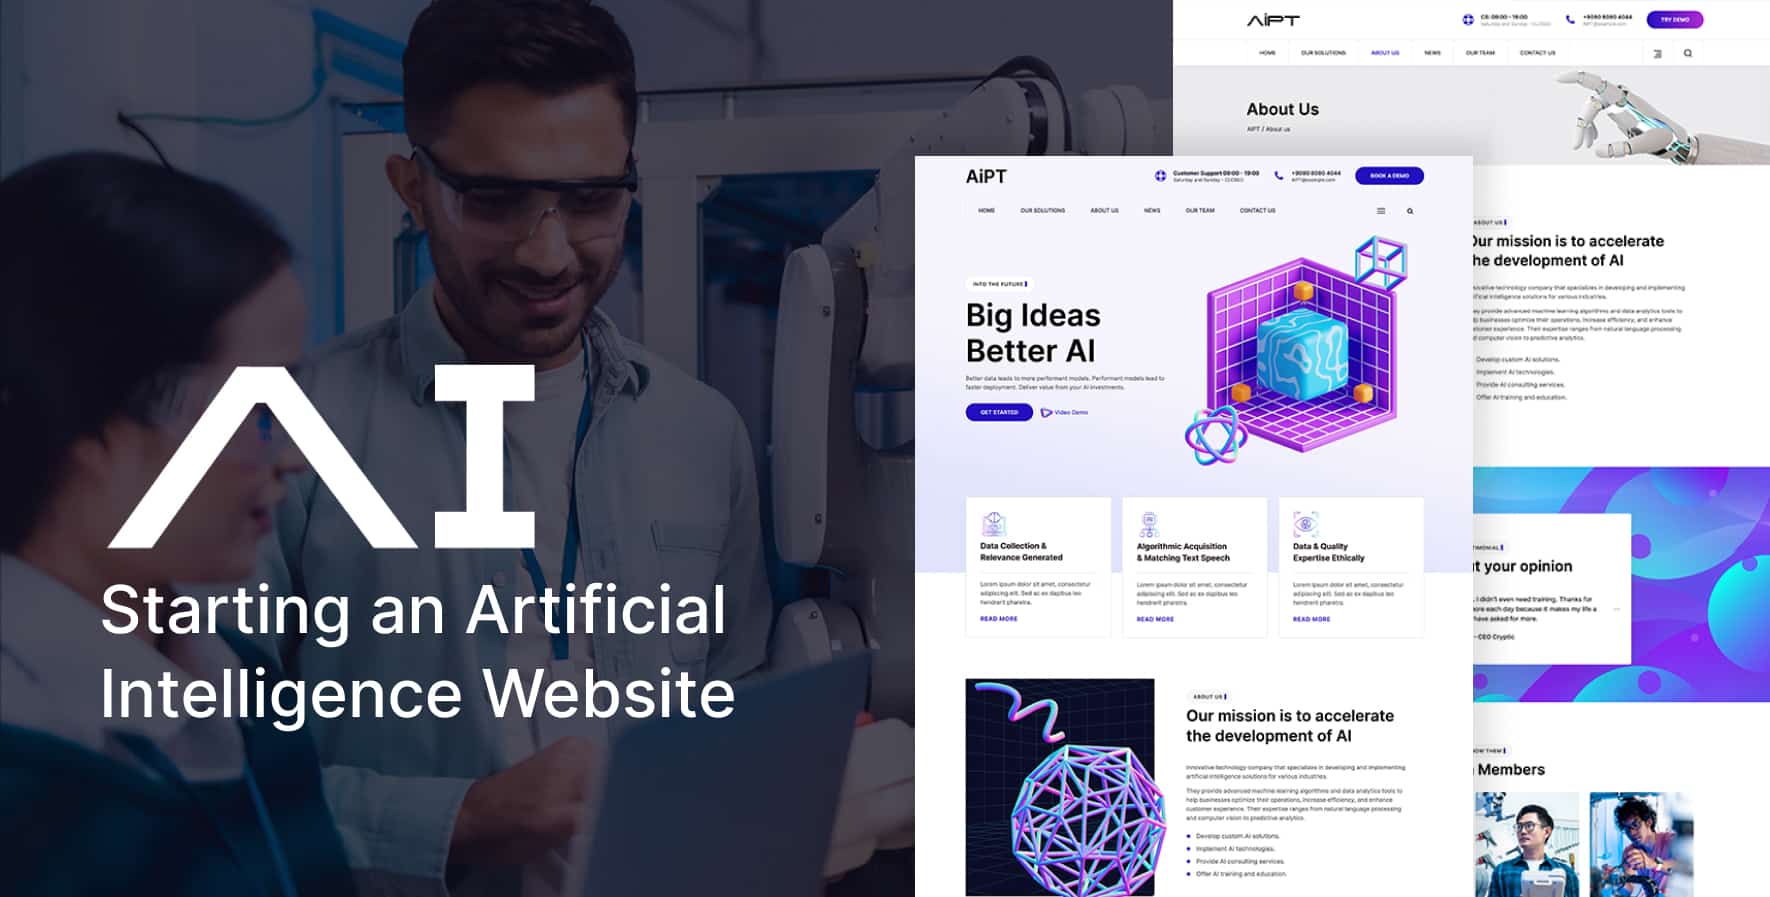 How to Build an Artificial Intelligence Website Article